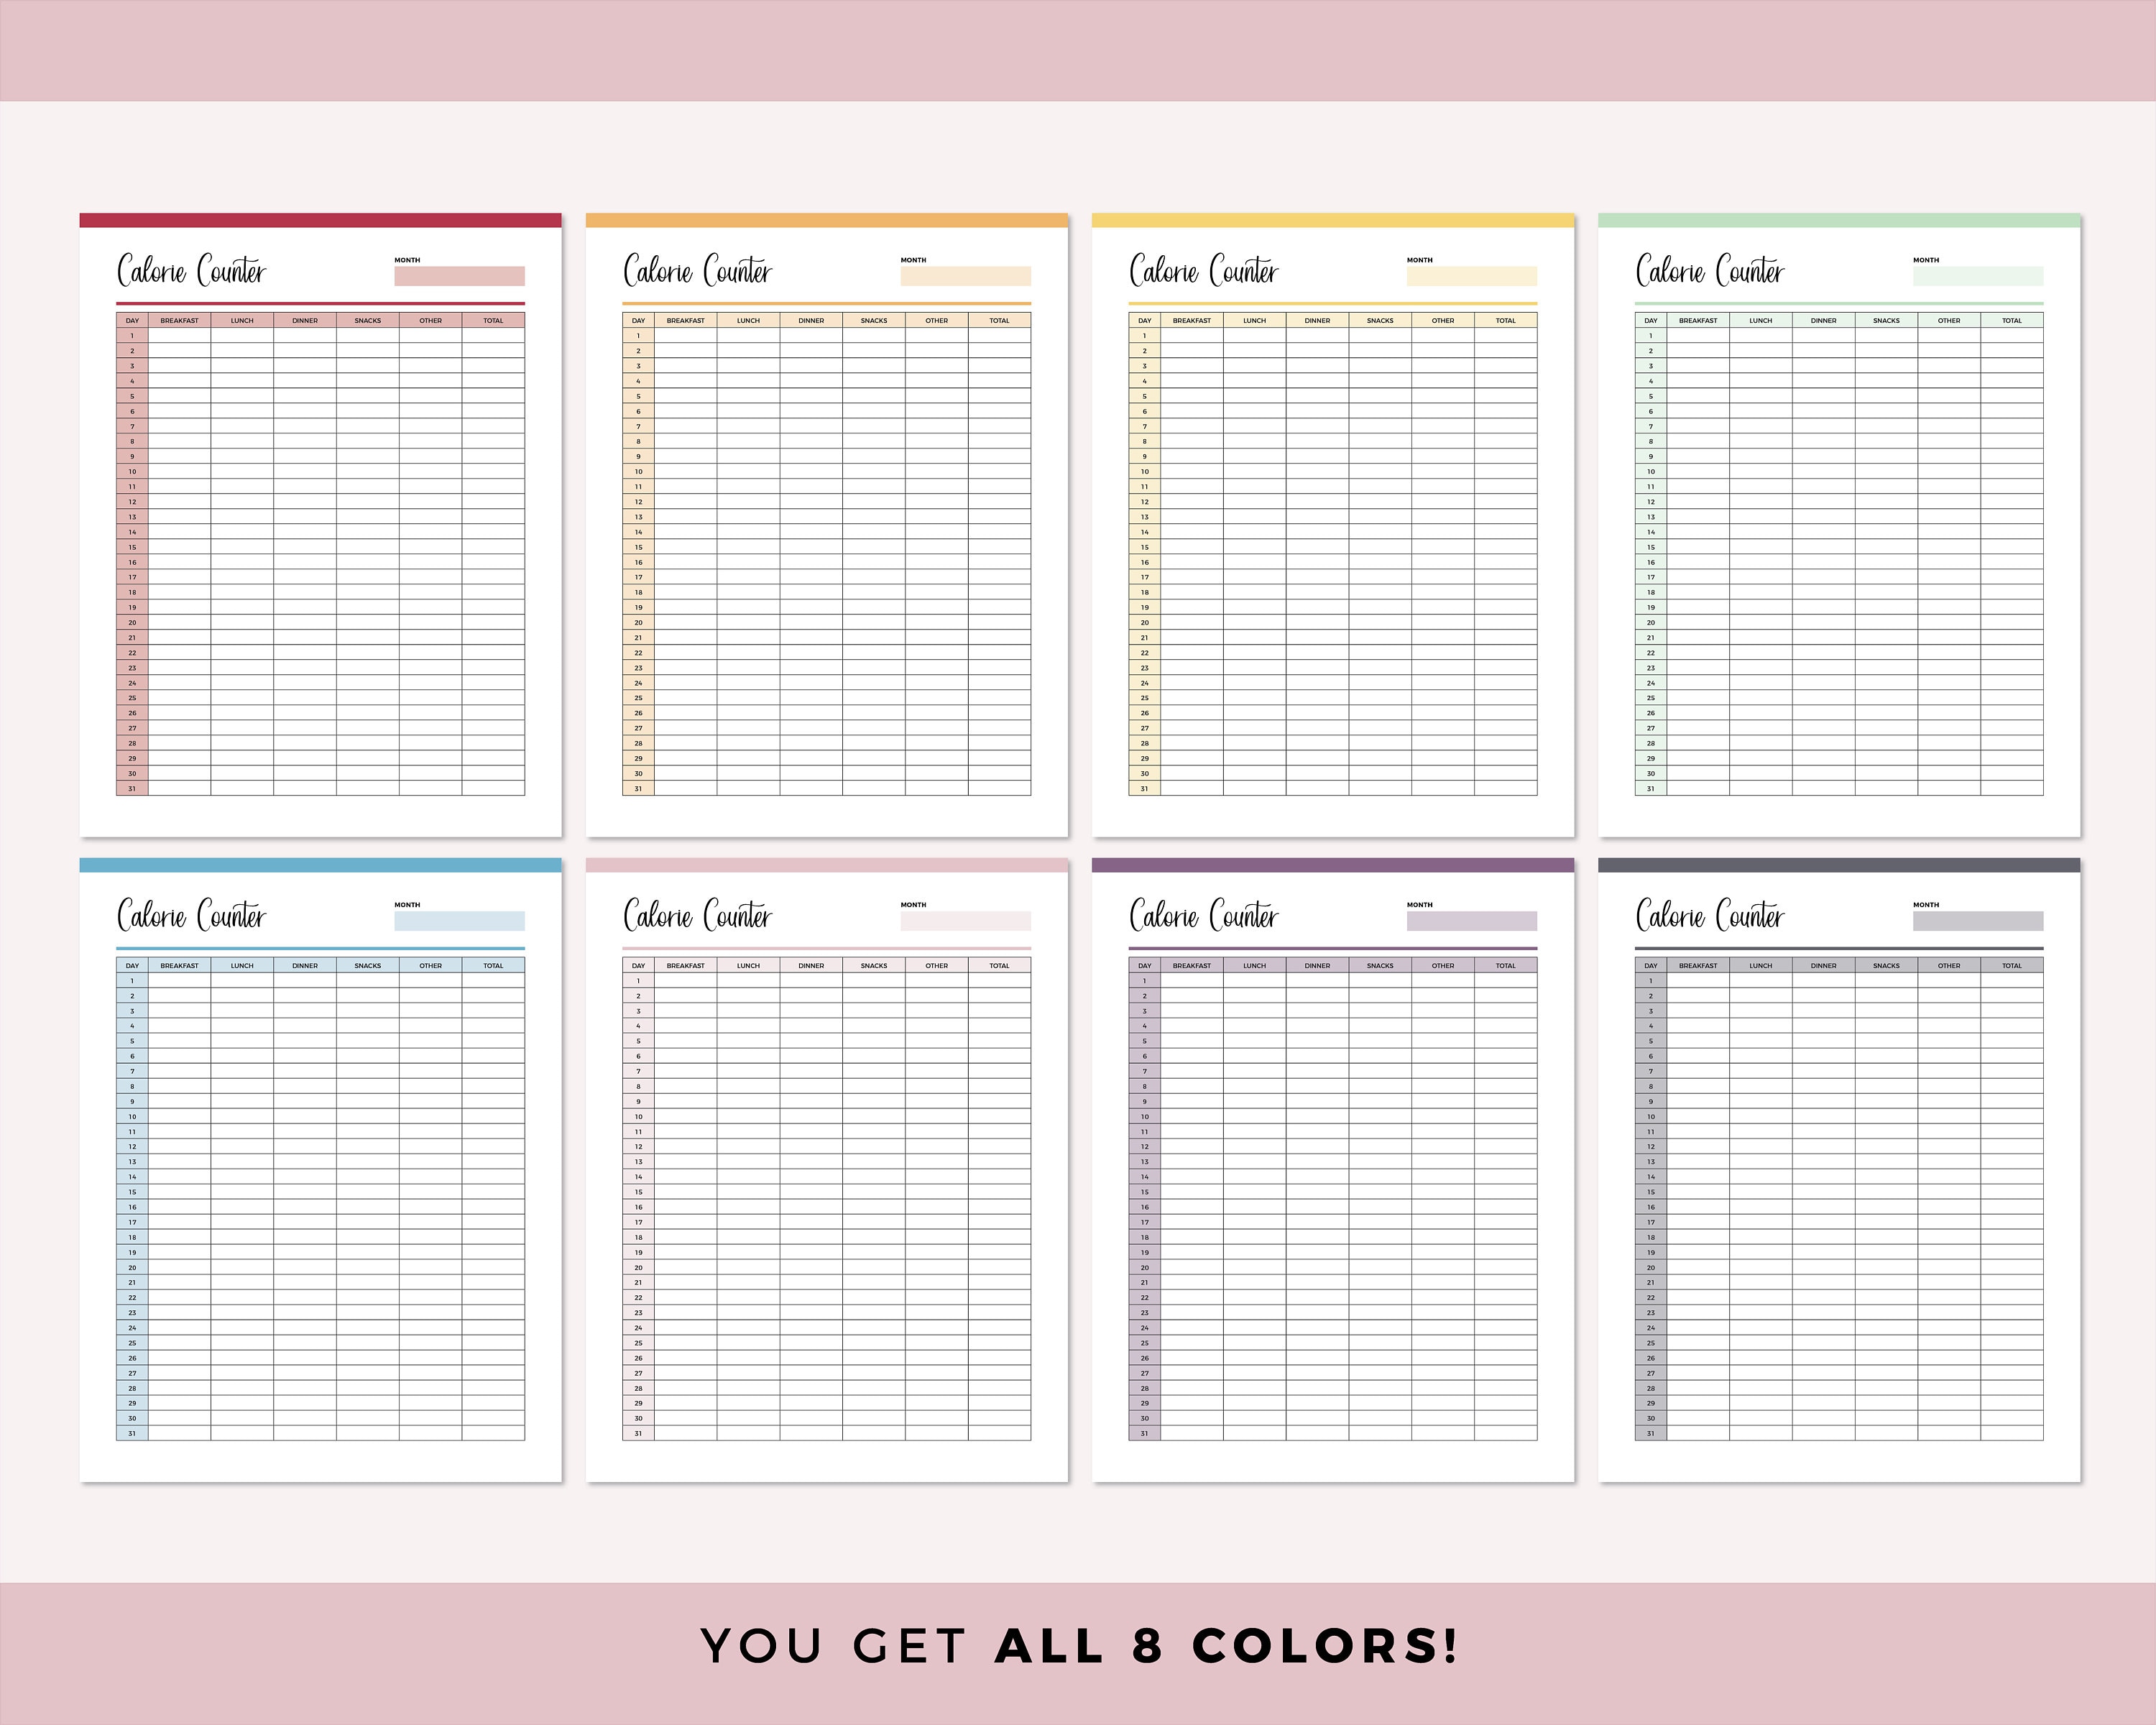 Calorie counter Archives • The Printables